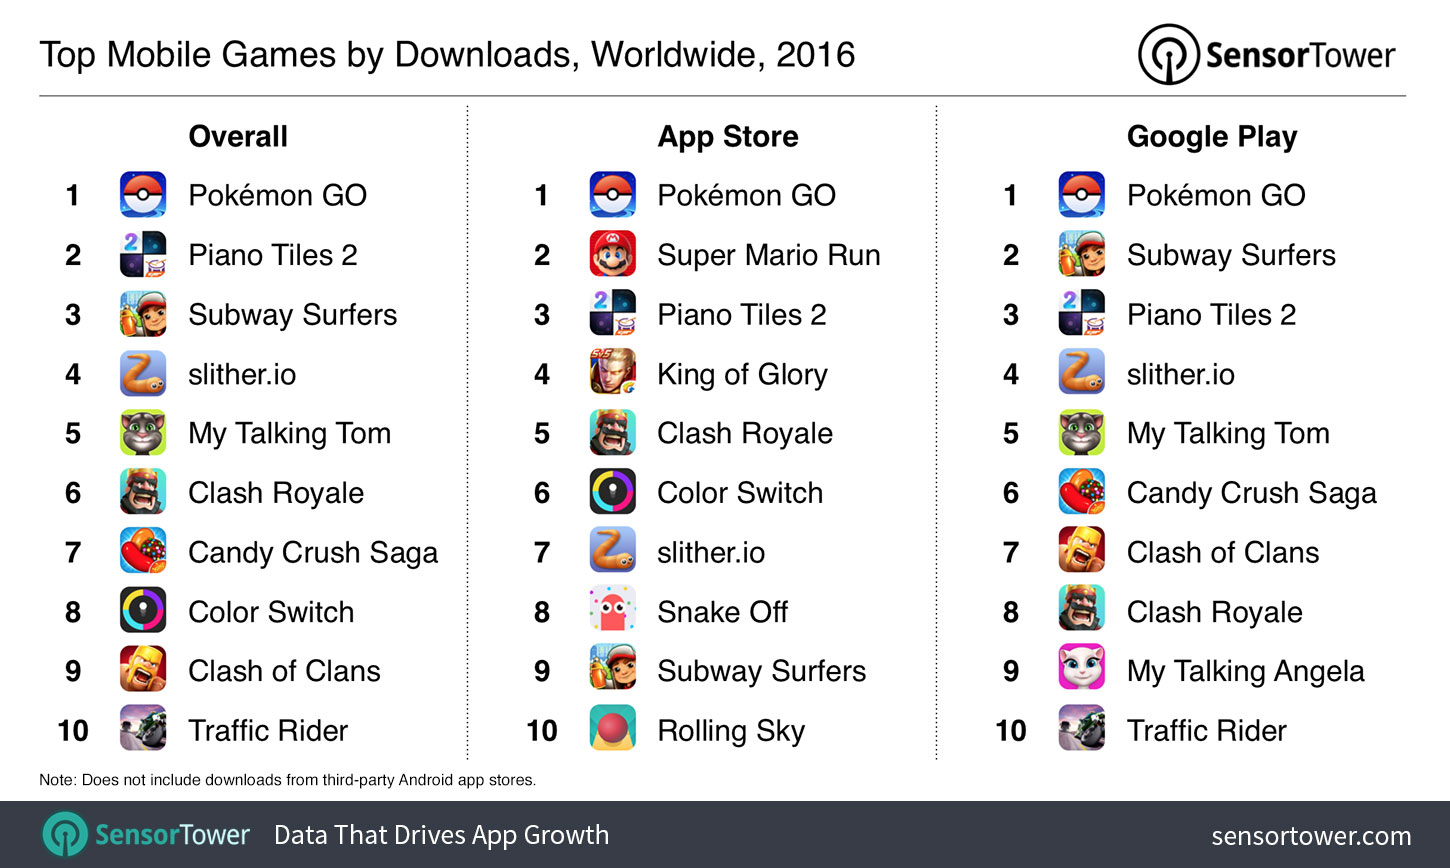 2016's Top Mobile Games by Downloads